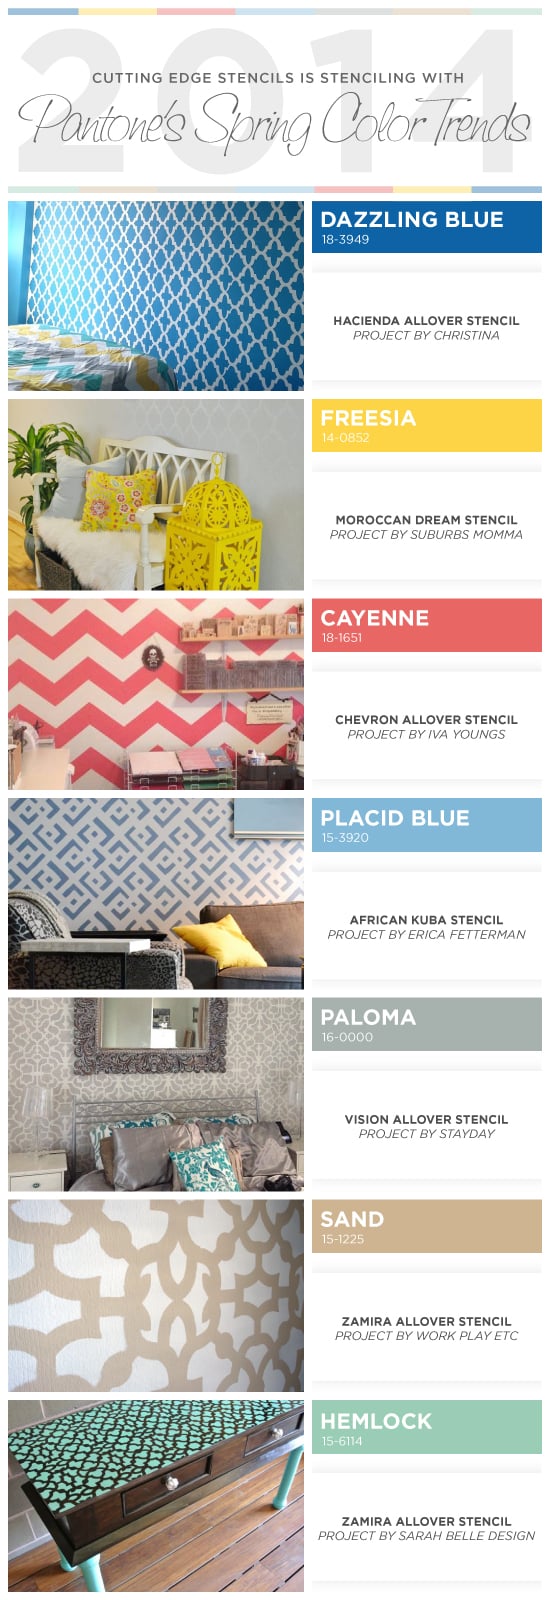 Cutting Edge Stencils shares stenciled spaces and home decor ideas using Pantone's 2014 Spring Color Trend report. http://www.cuttingedgestencils.com/wall-stencils-stencil-designs.html